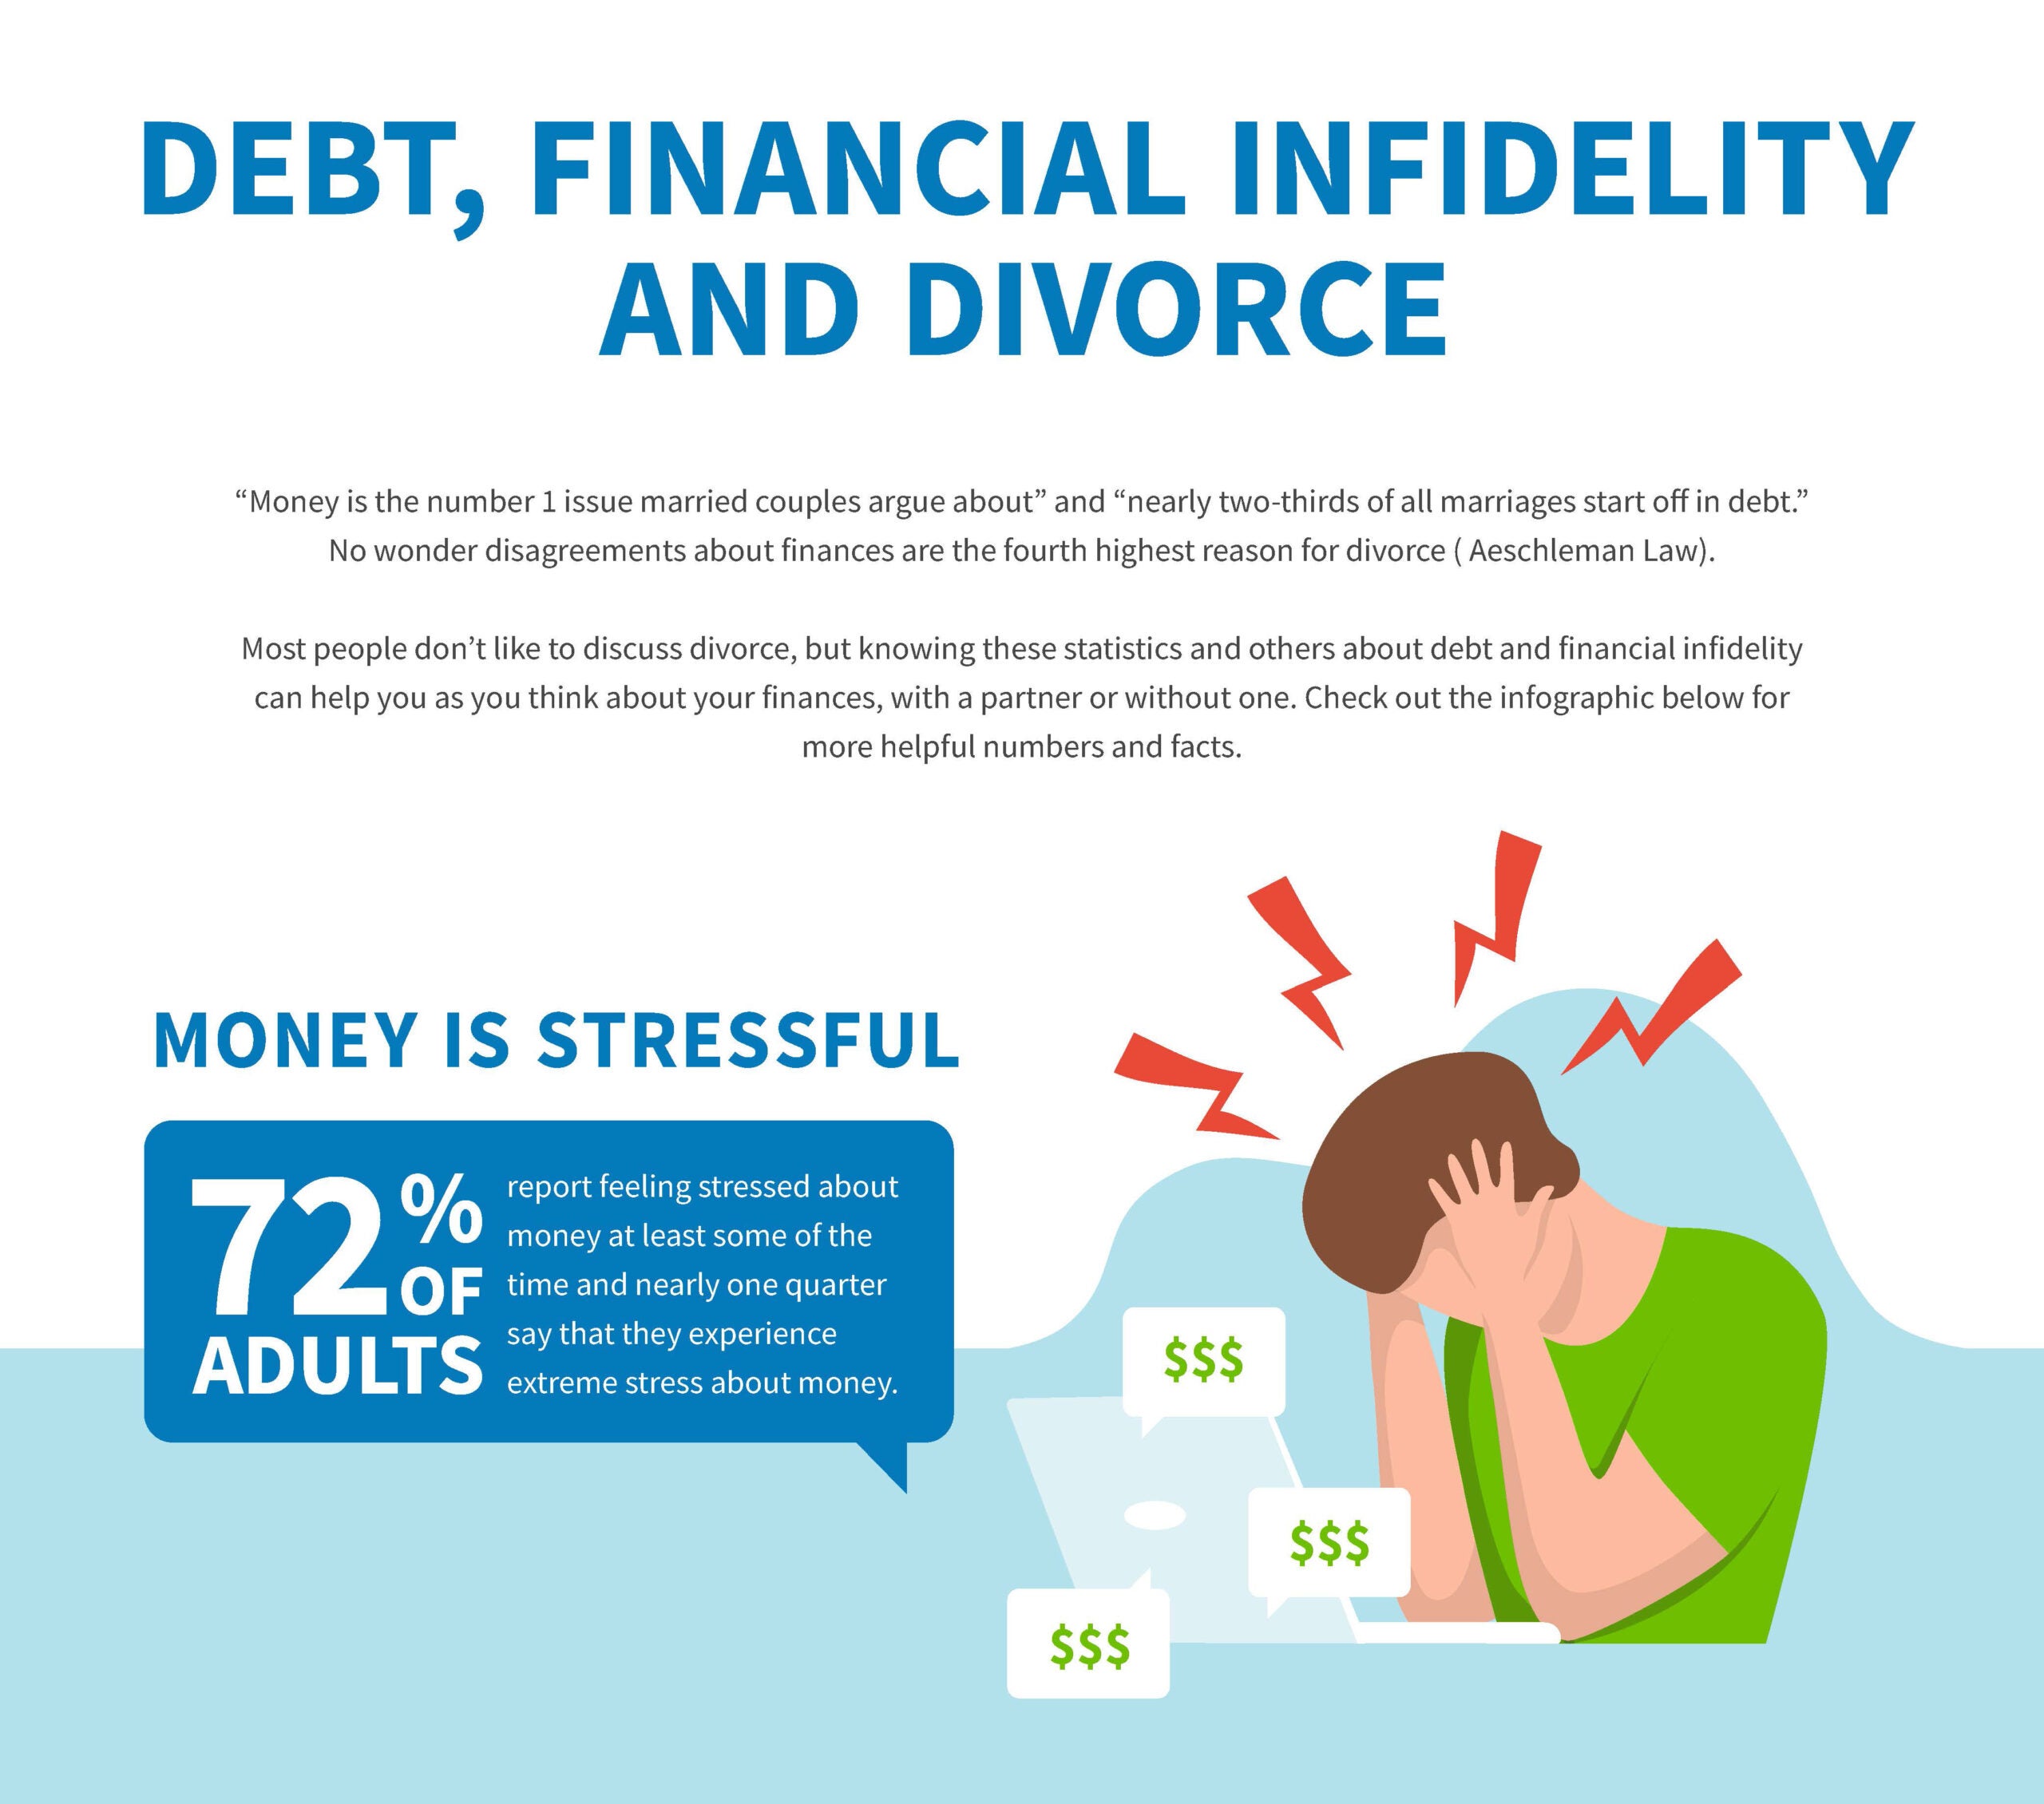 Debt, financial infidelity and and divorce